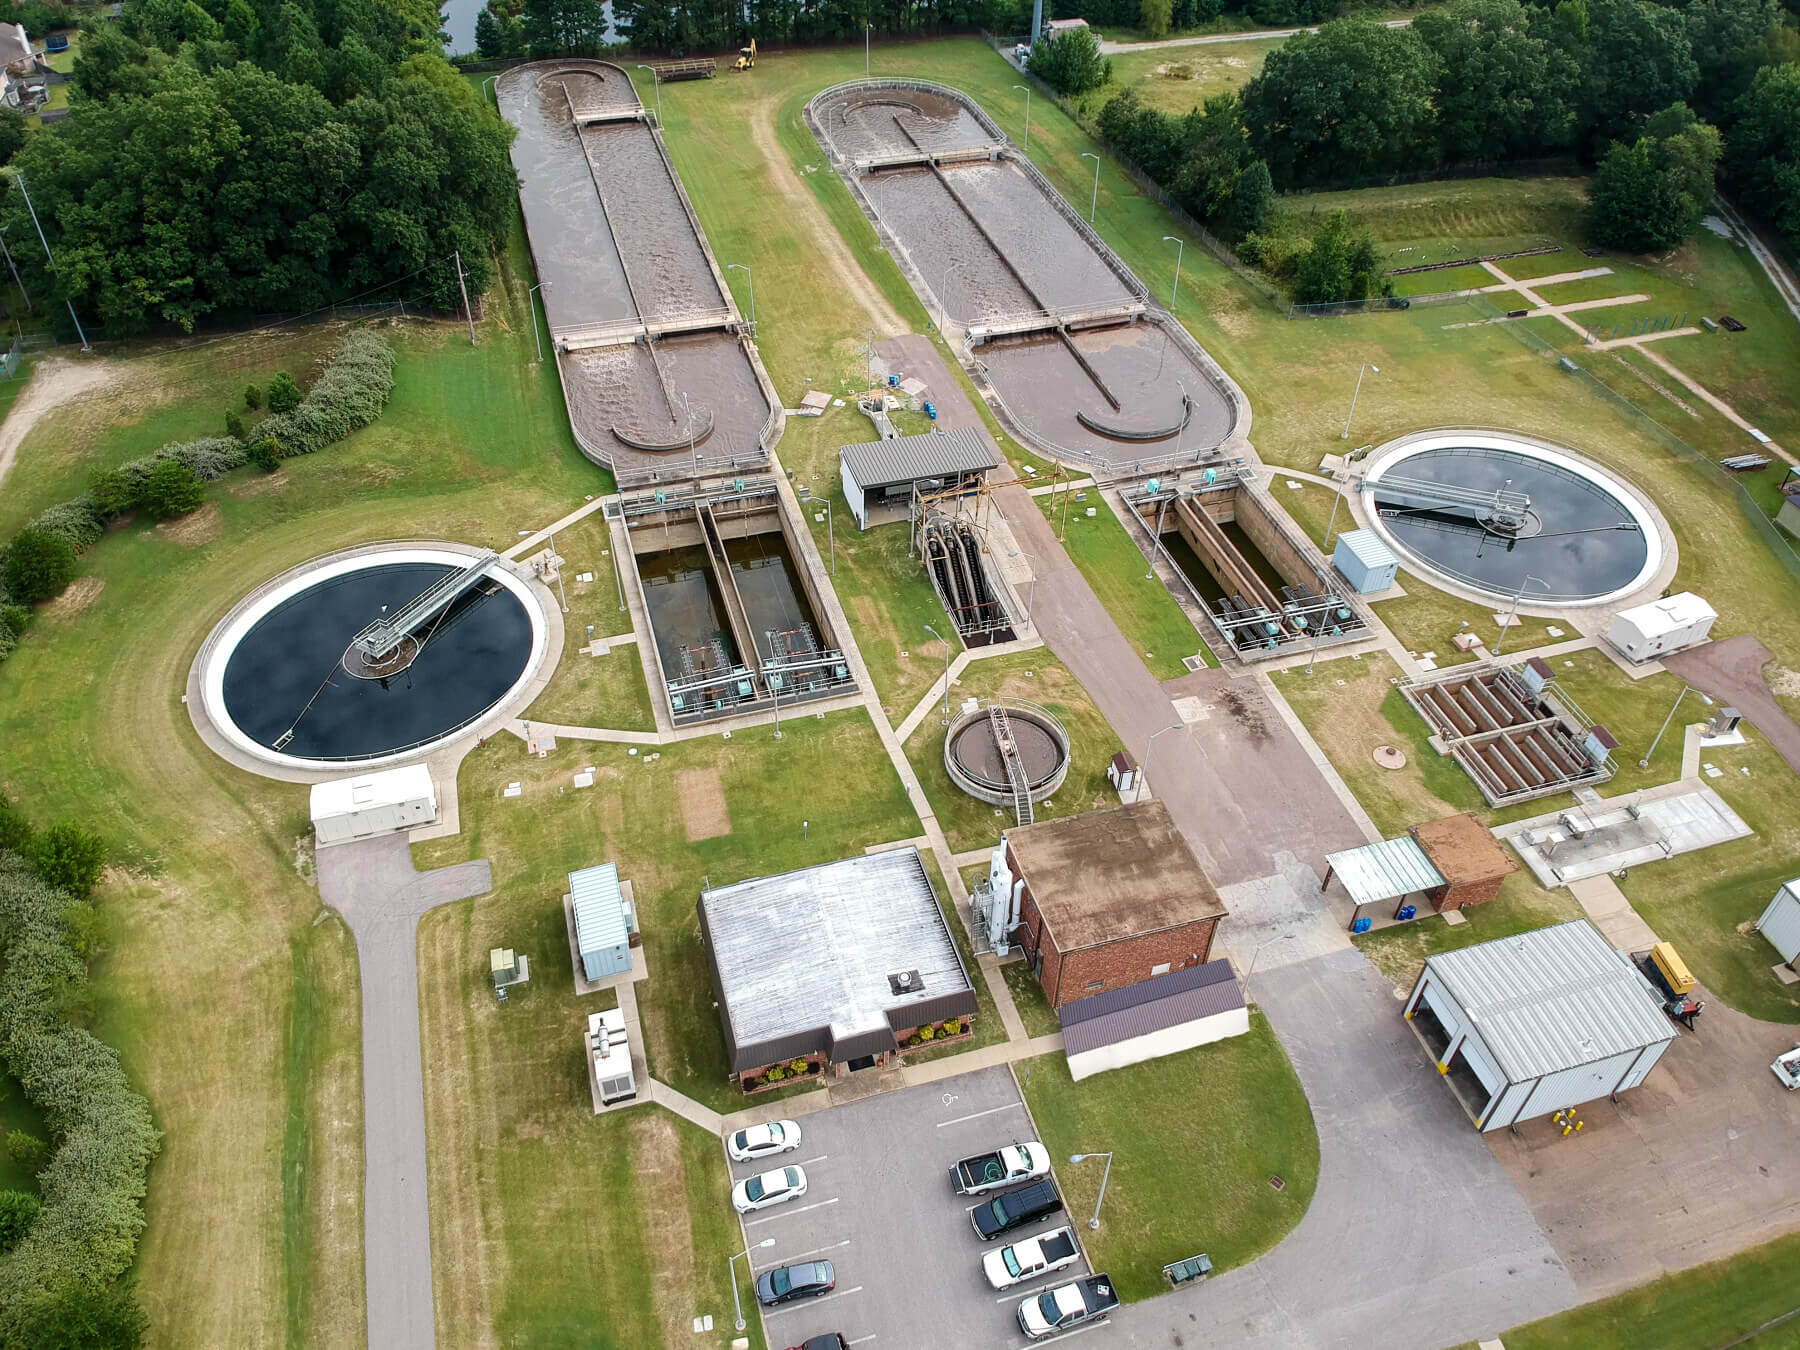 Aerial view of the City of Collierville Shelton Road Wastewater Treatment Plant.